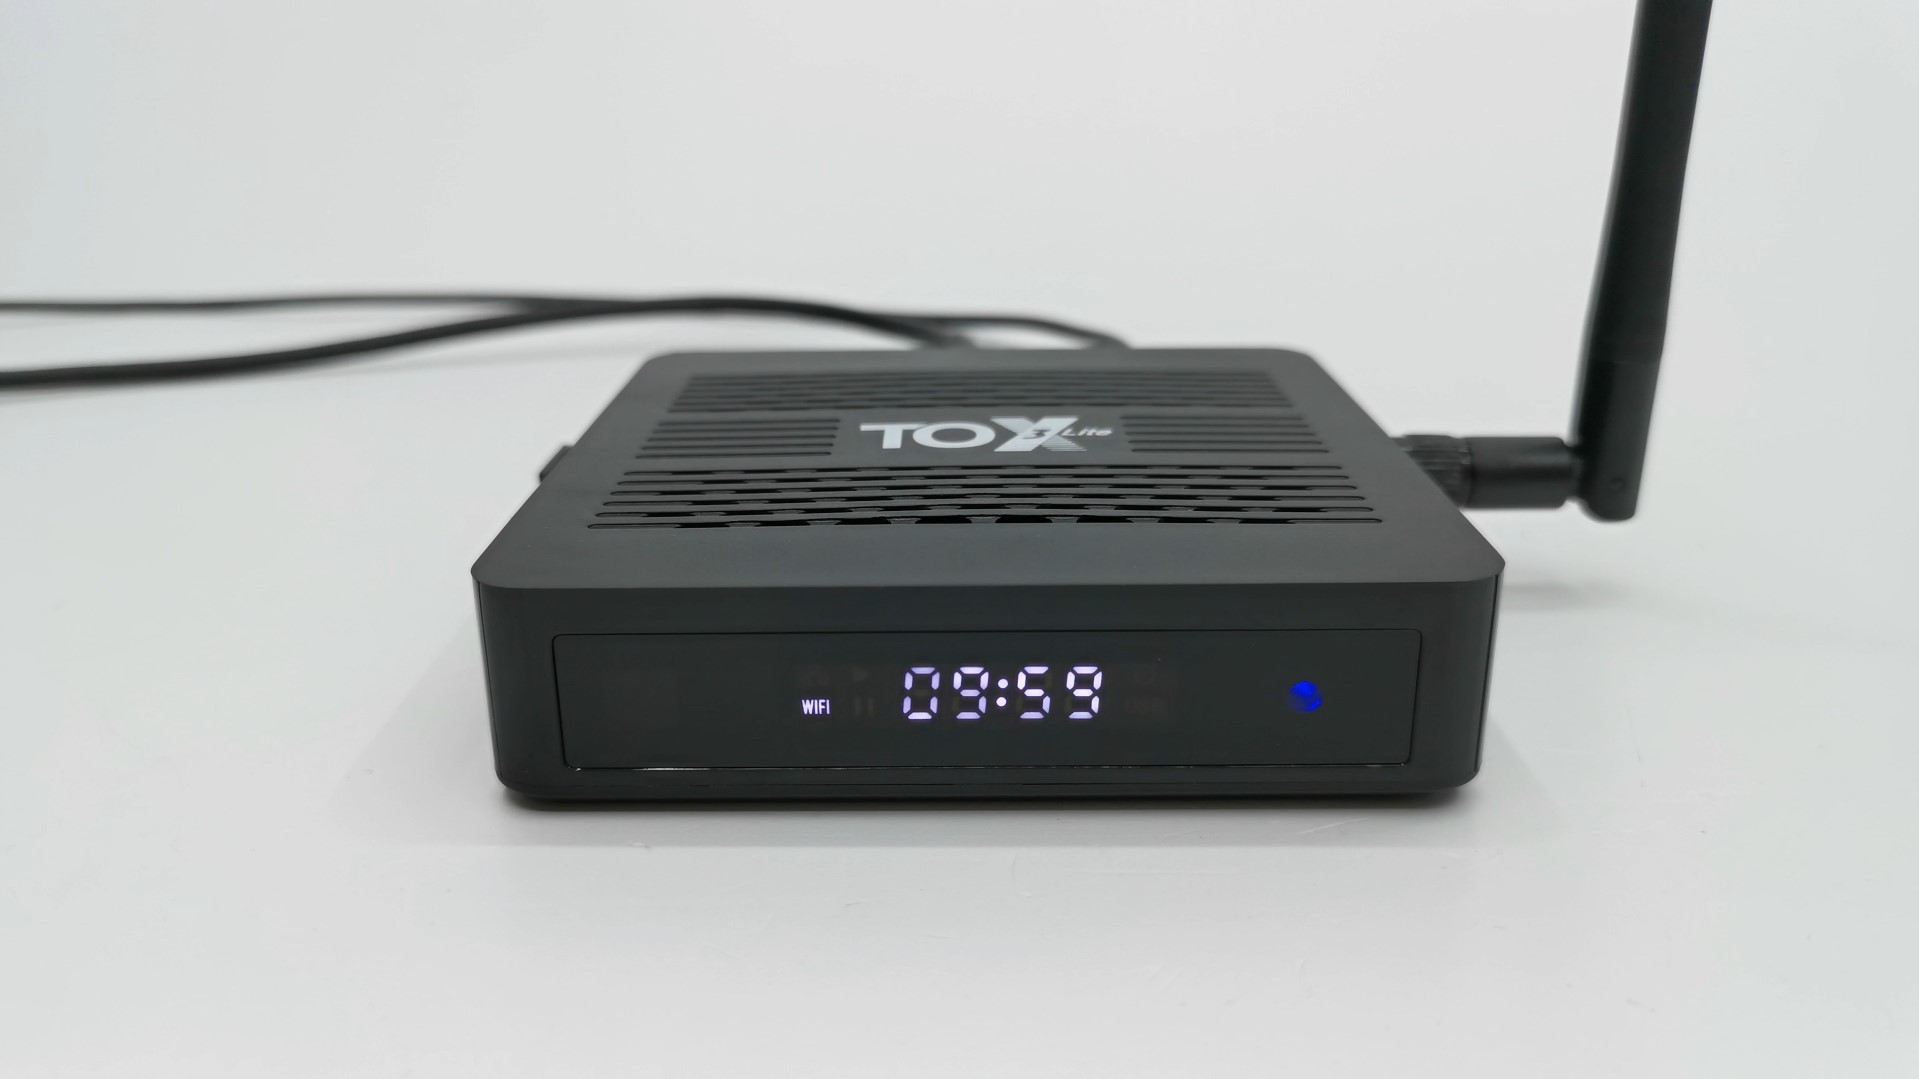 TOX3 TV Box front LED monitor and HDD activity light